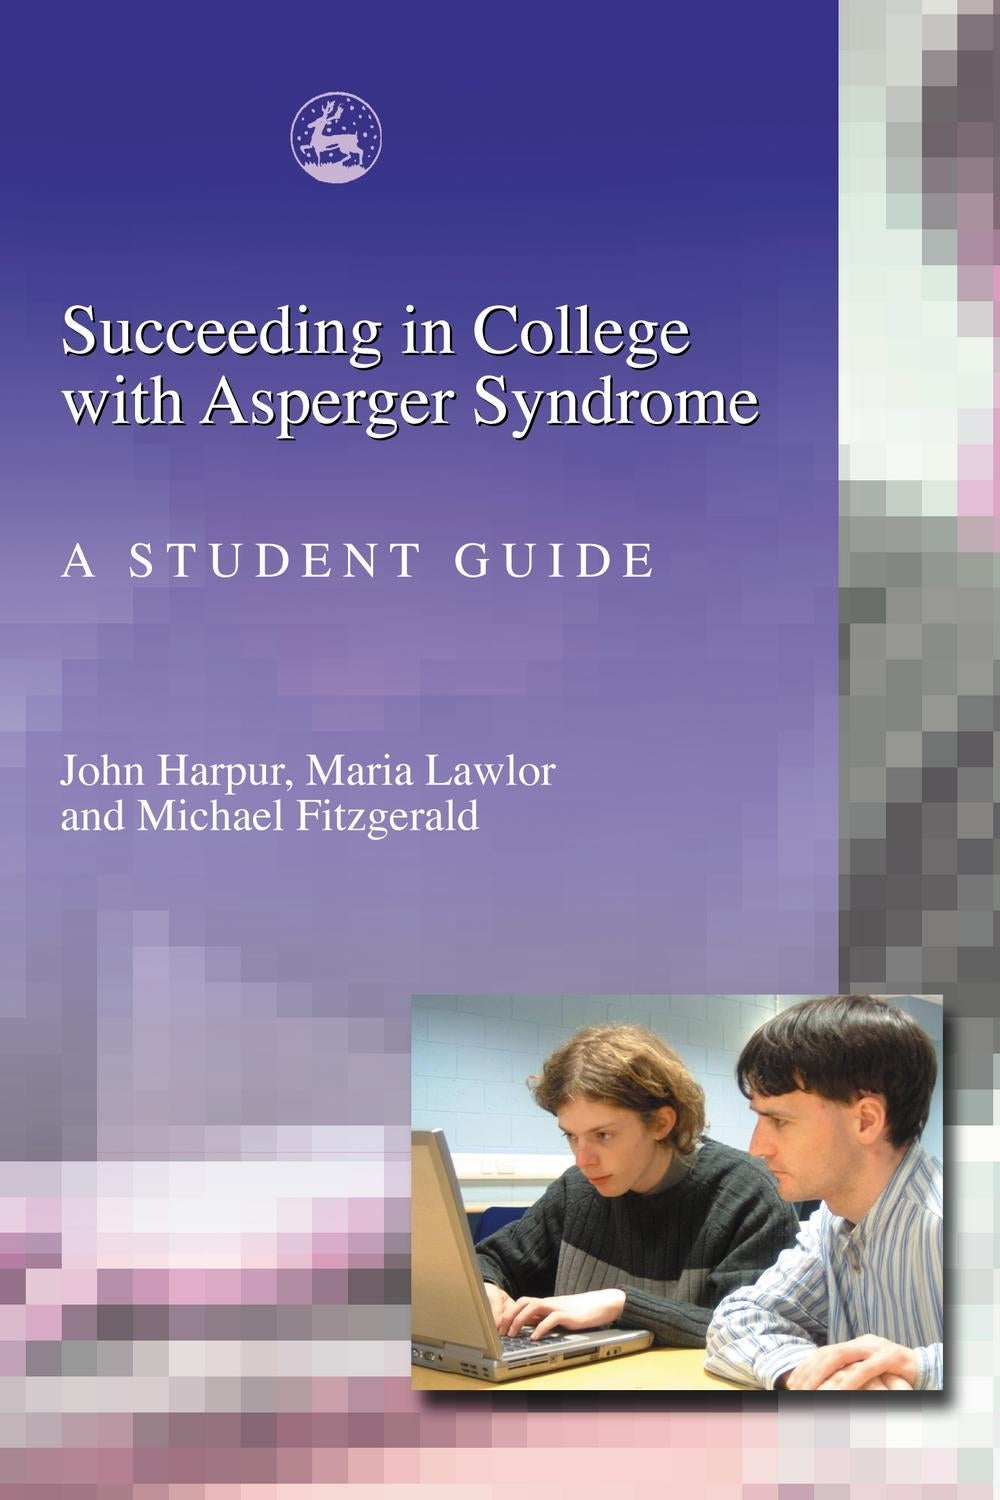 Succeeding in College with Asperger Syndrome by John Harpur, Michael Fitzgerald, Maria Lawlor